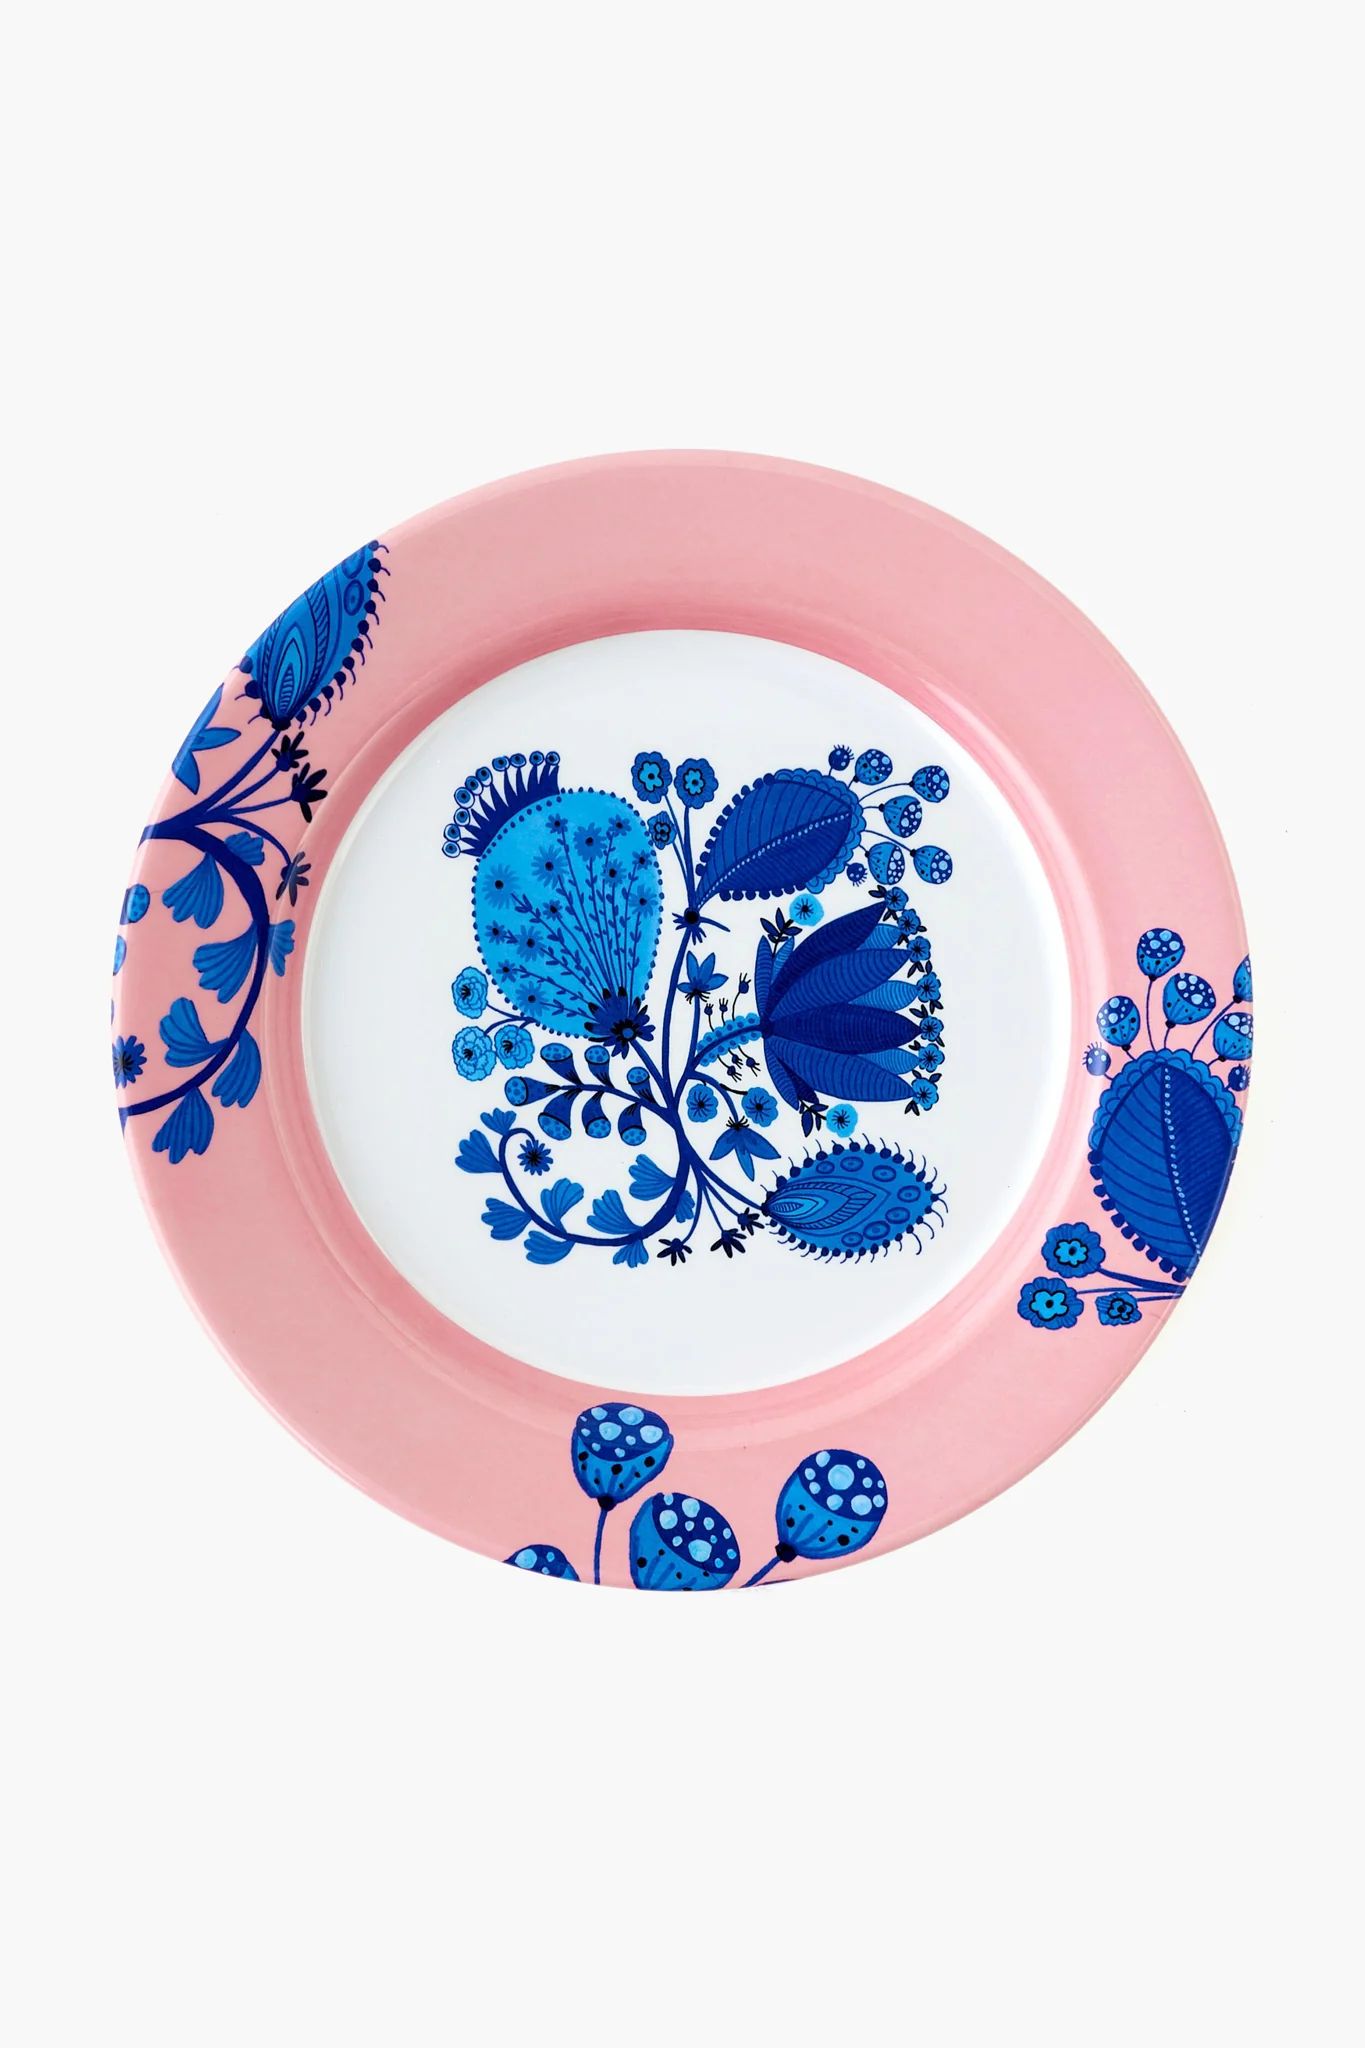 Blue and White with Pink Border Melamine Plate | Tuckernuck (US)